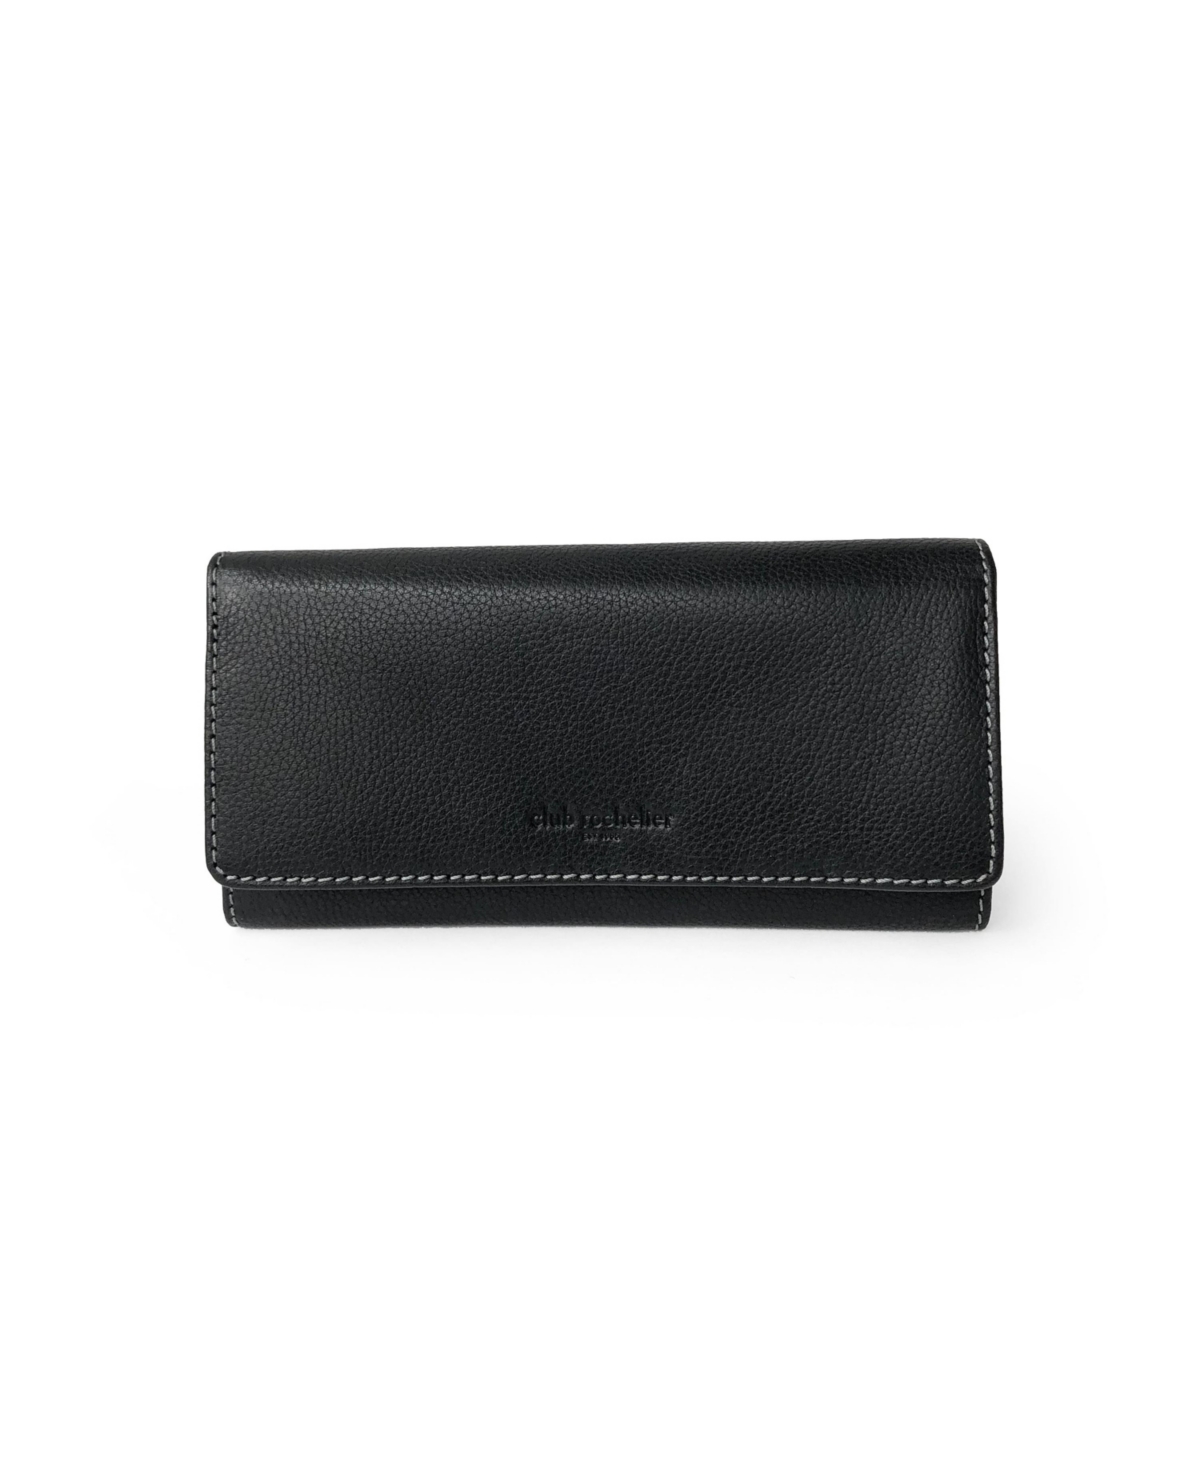 CLUB ROCHELIER LADIES FULL LEATHER CLUTCH WALLET WITH GUSSET POCKET